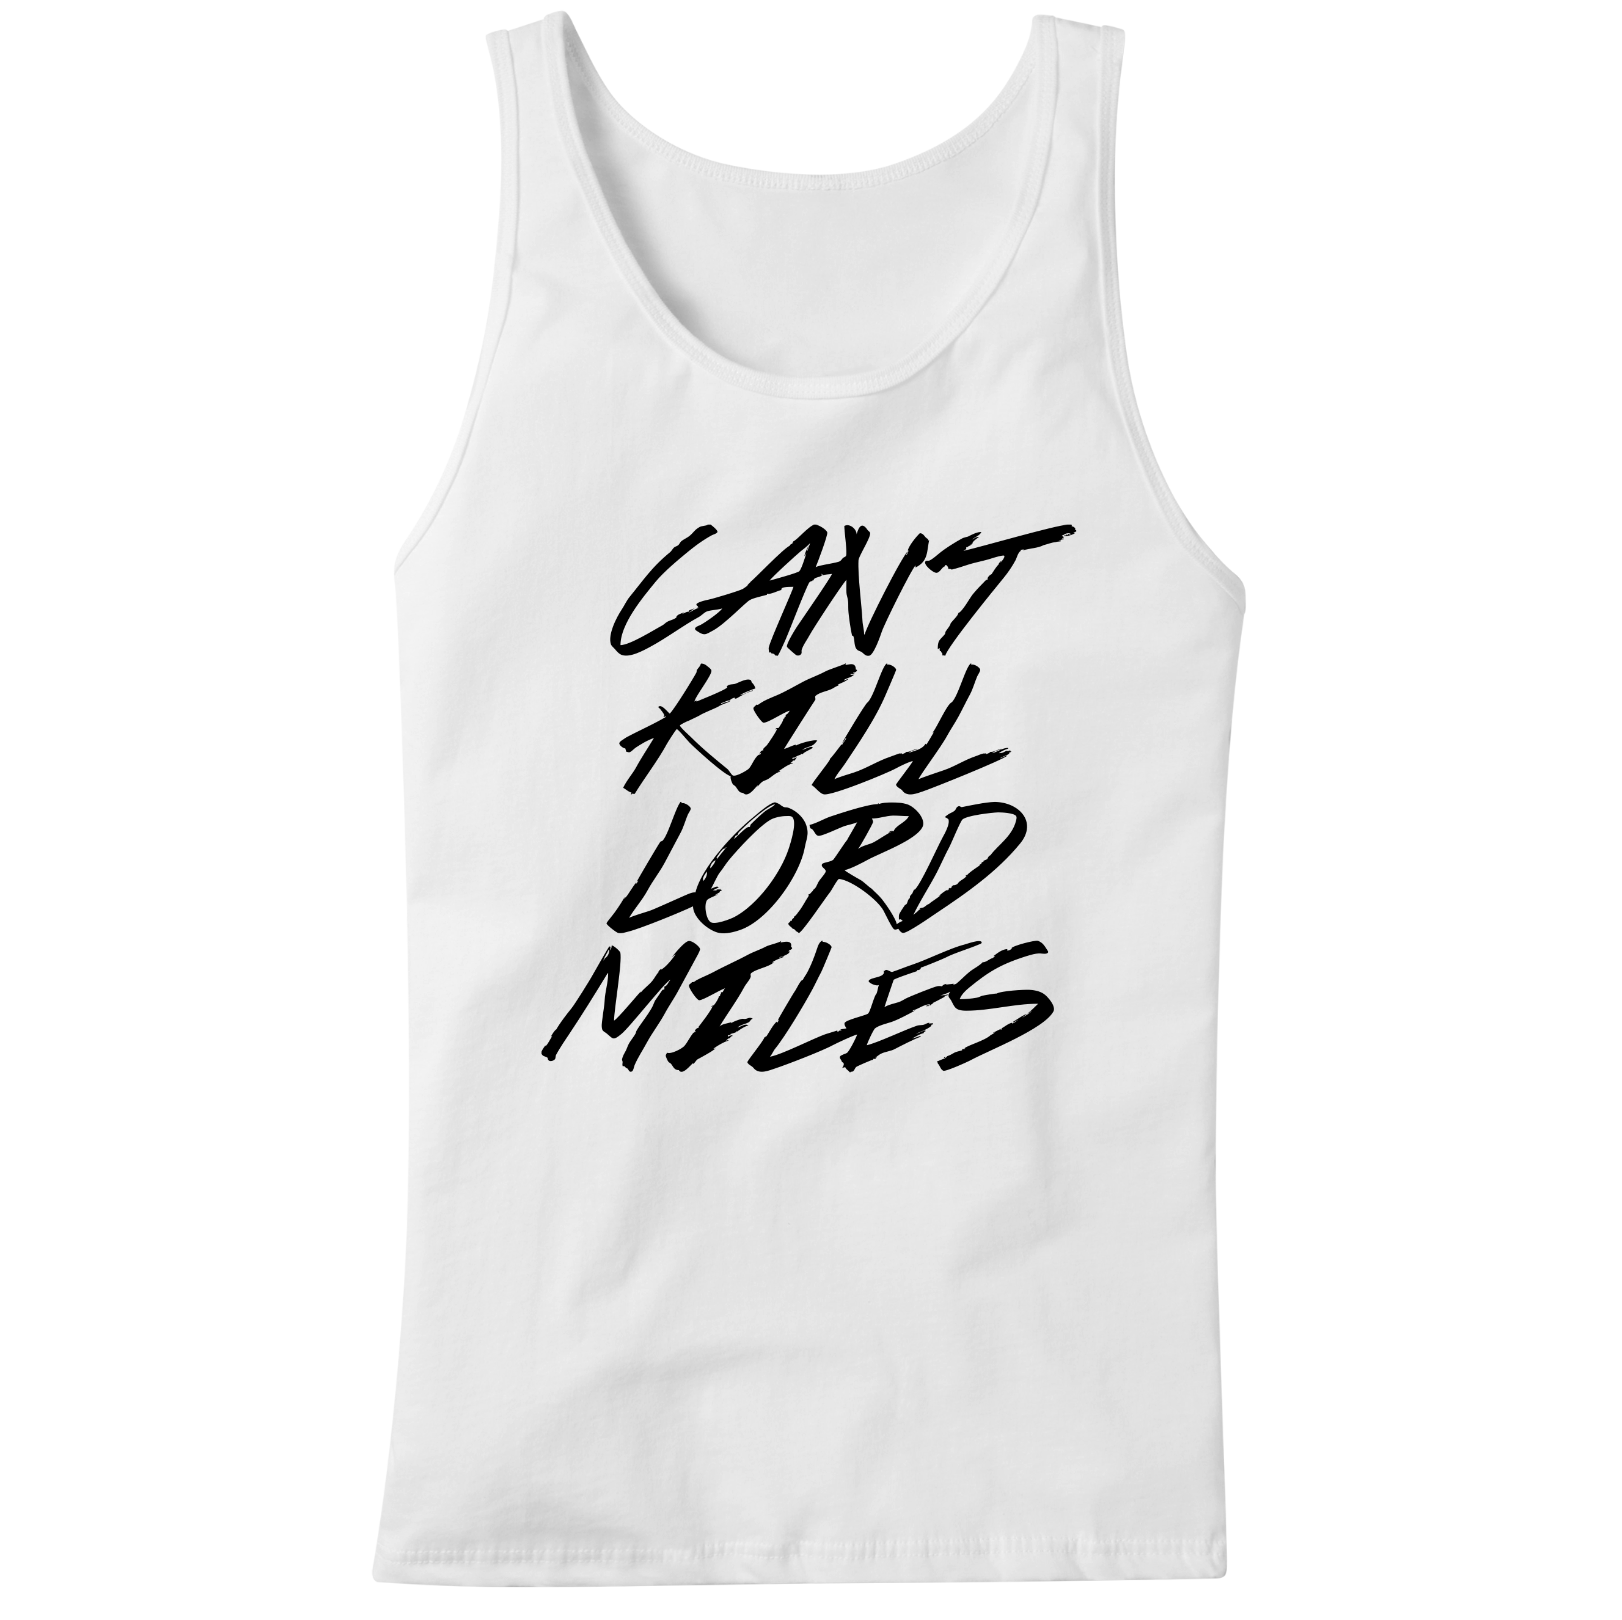 Cant Kill Lord Miles (White) Racerback-2